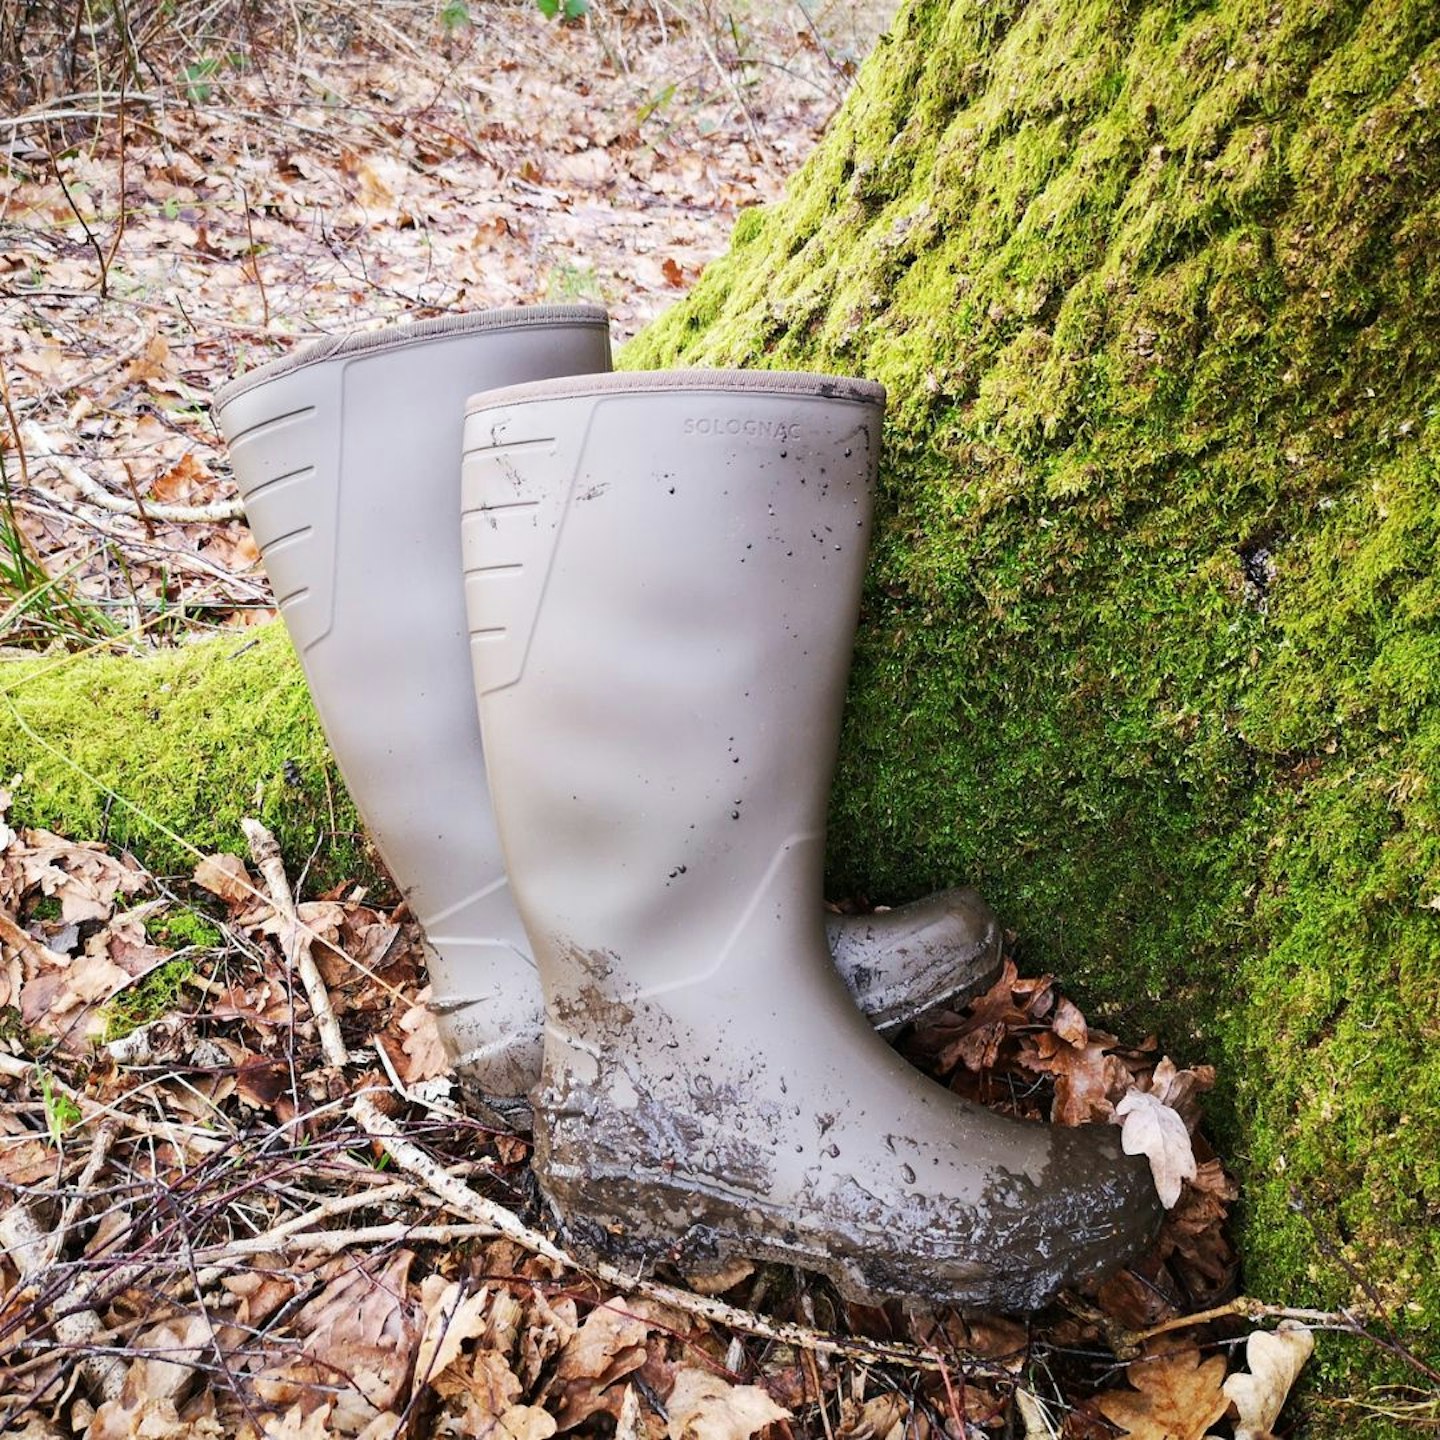 Decathlon wellies leaning against a tree